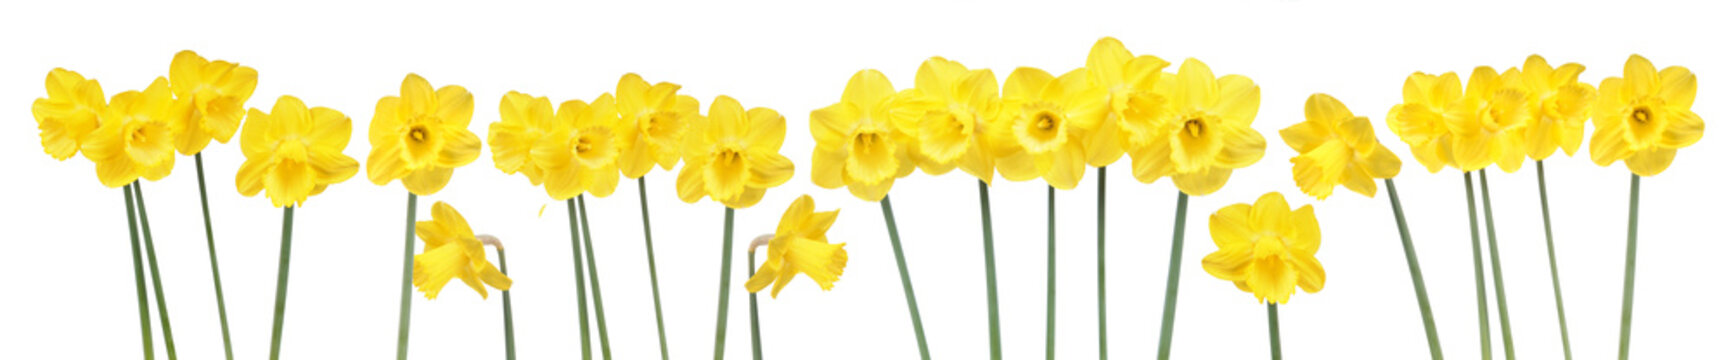 Spring flowers border with many blooming yellow daffodils isolated on white background